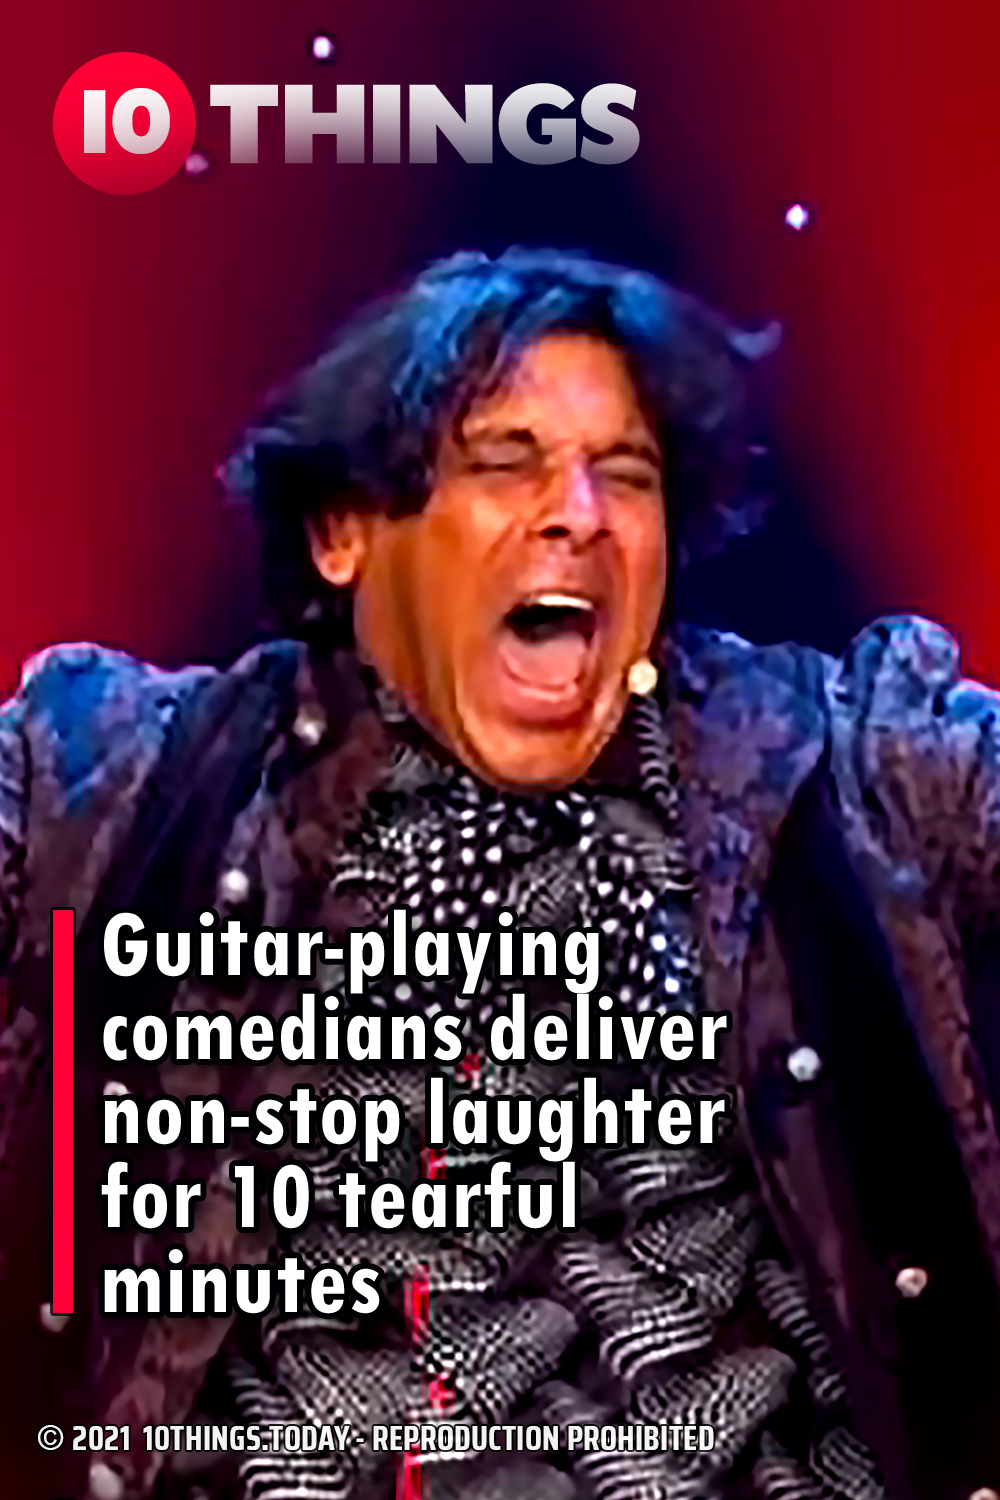 Guitar-playing comedians deliver non-stop laughter for 10 tearful minutes